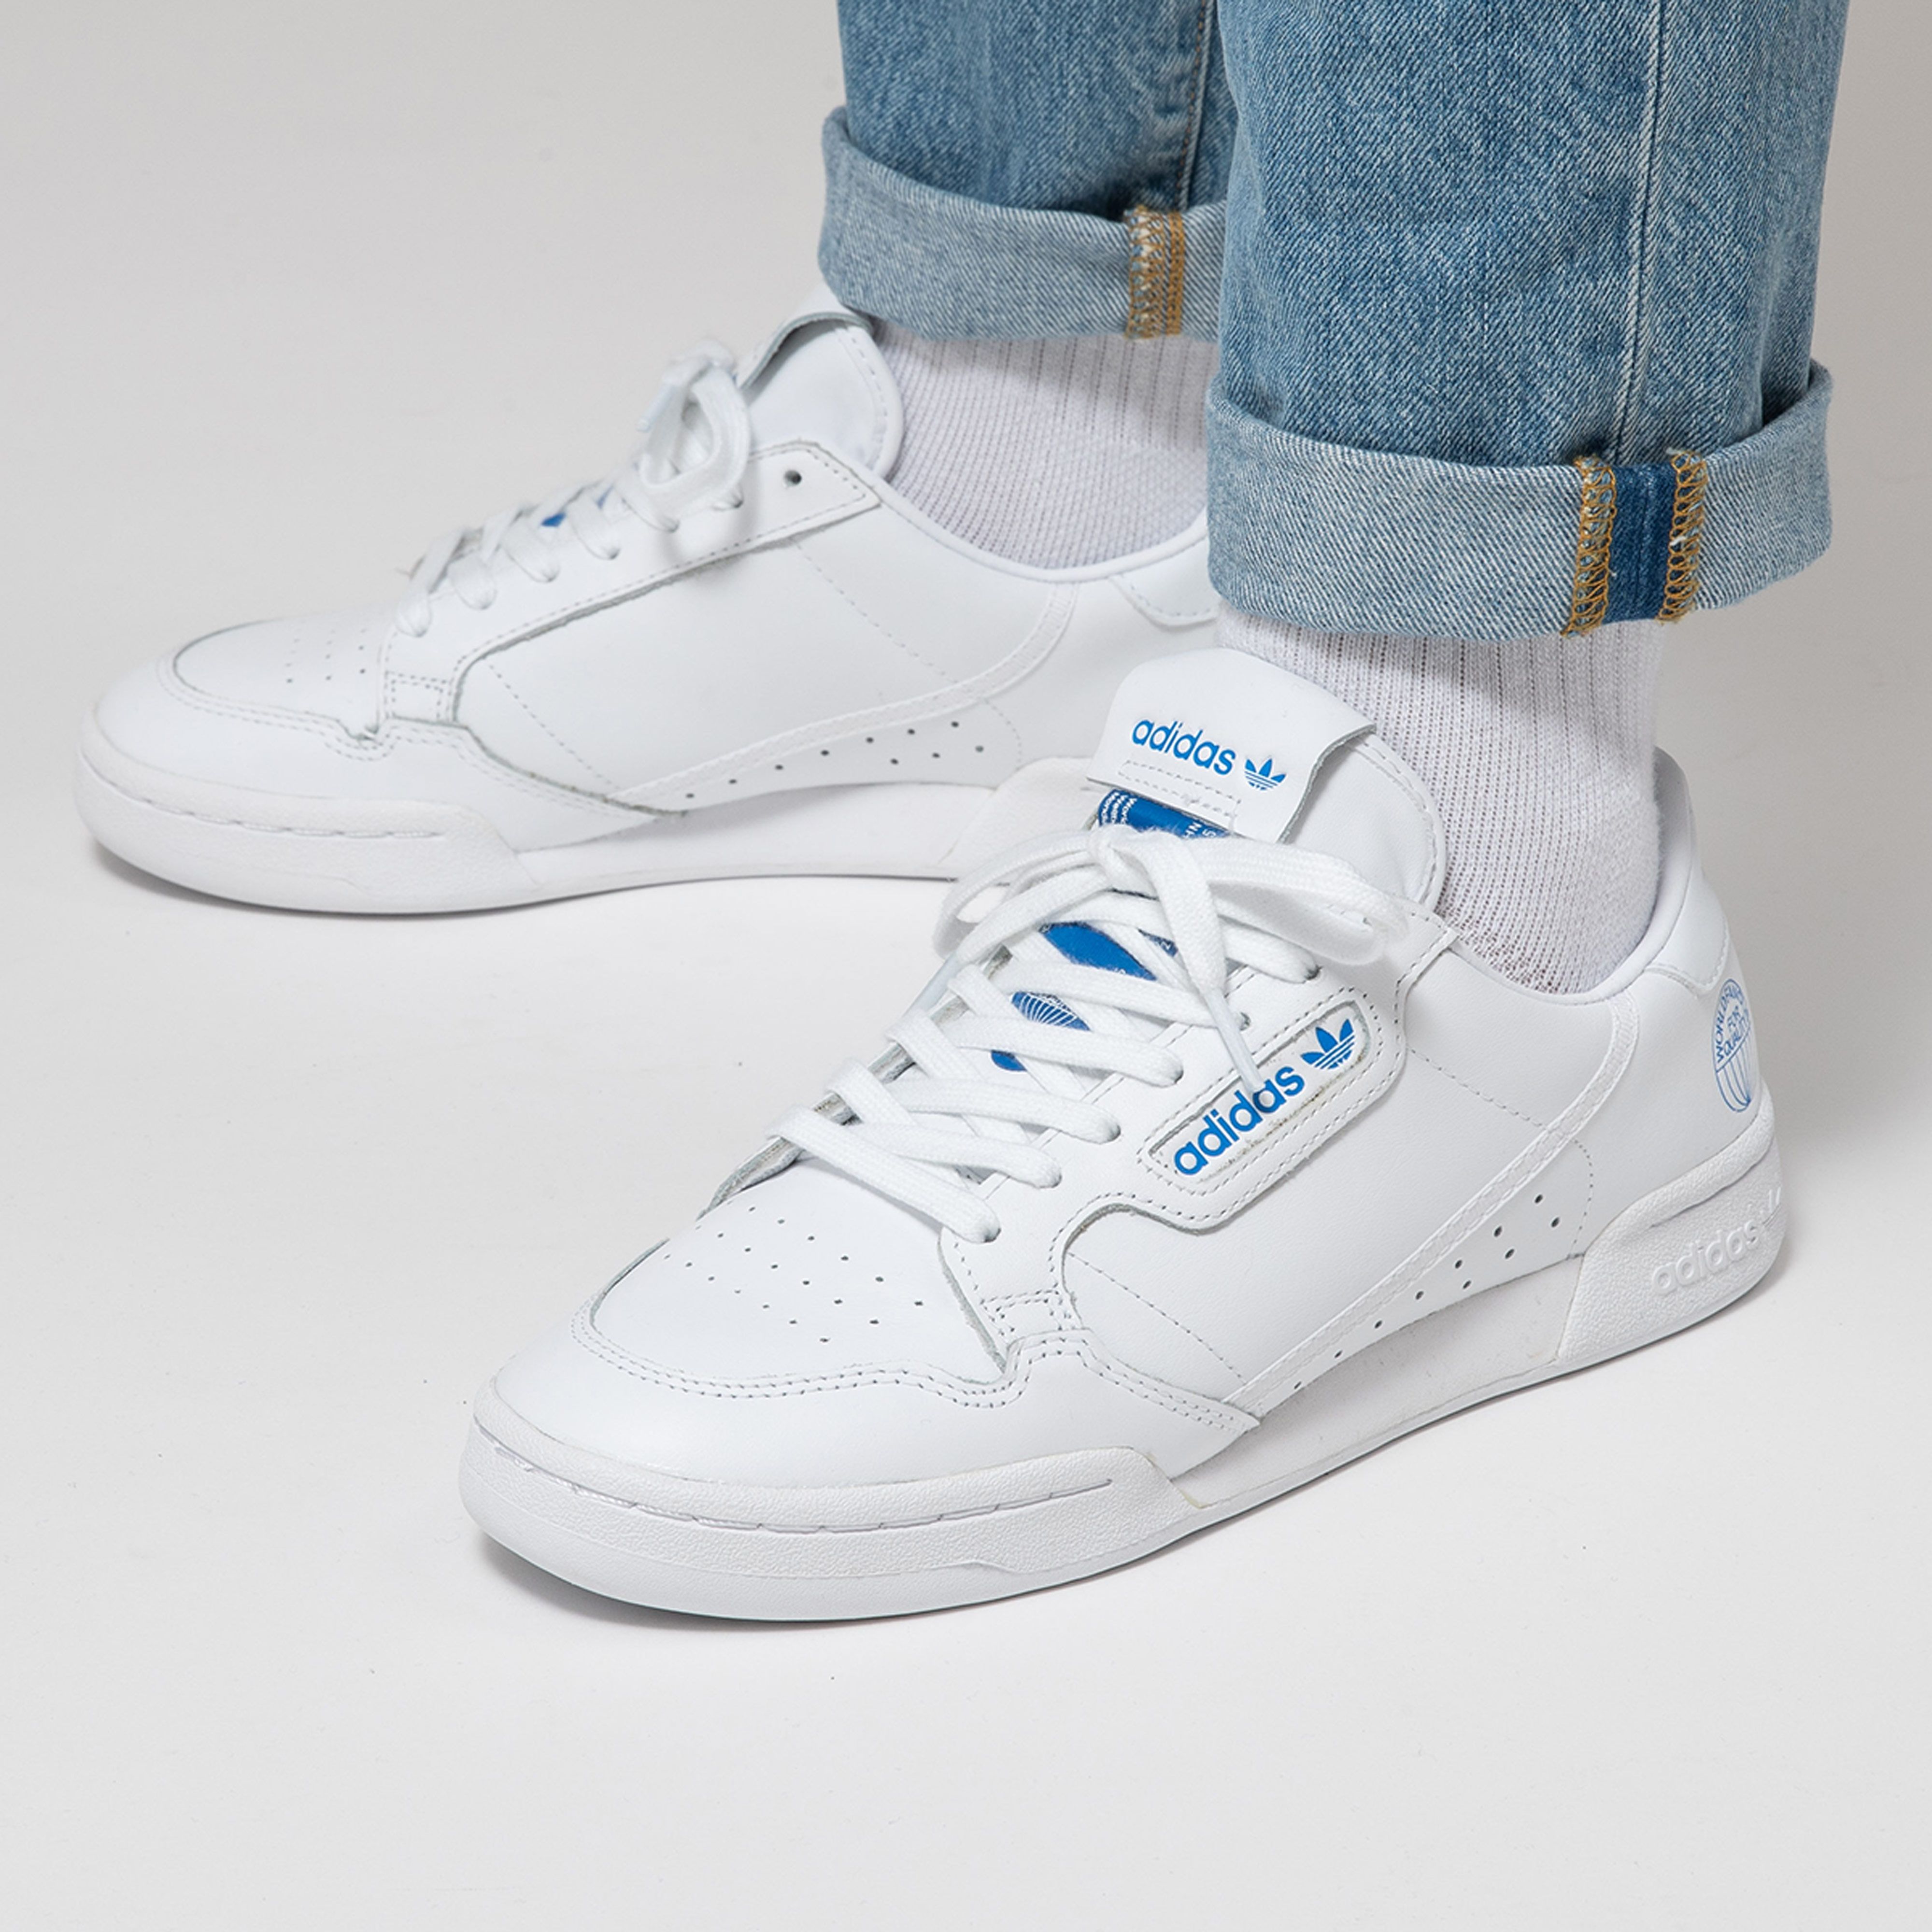 Titolo "world famous for quality 🌍 adidas 80 "White/Bluebird" available online ➡️ https://t.co/vsqpbl6Fcx UK 6.5 (40) - UK 10.5 (45 1/3)⁠ style code 🔎 FV3743⁠ #adidas #adidascontinental80 # continental80 #titolo #